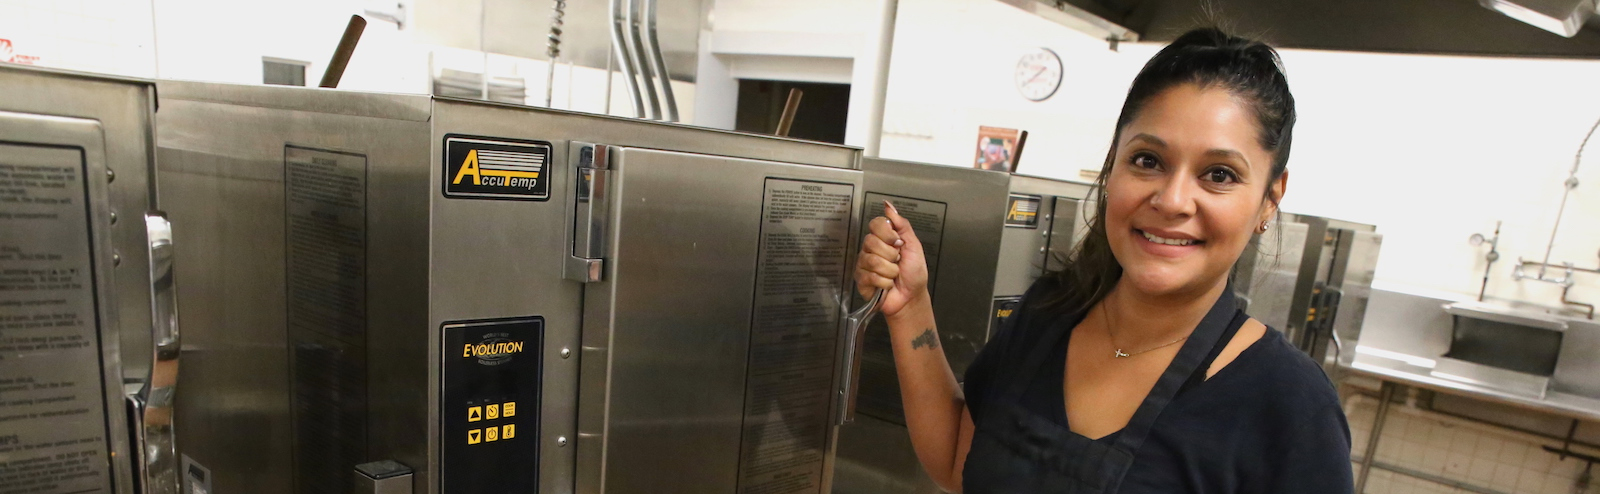 Stephanie Ruiz, owner of The Hot Tamale Co!, launched her business out of a shared kitchen at the Community Harvest Food Bank.